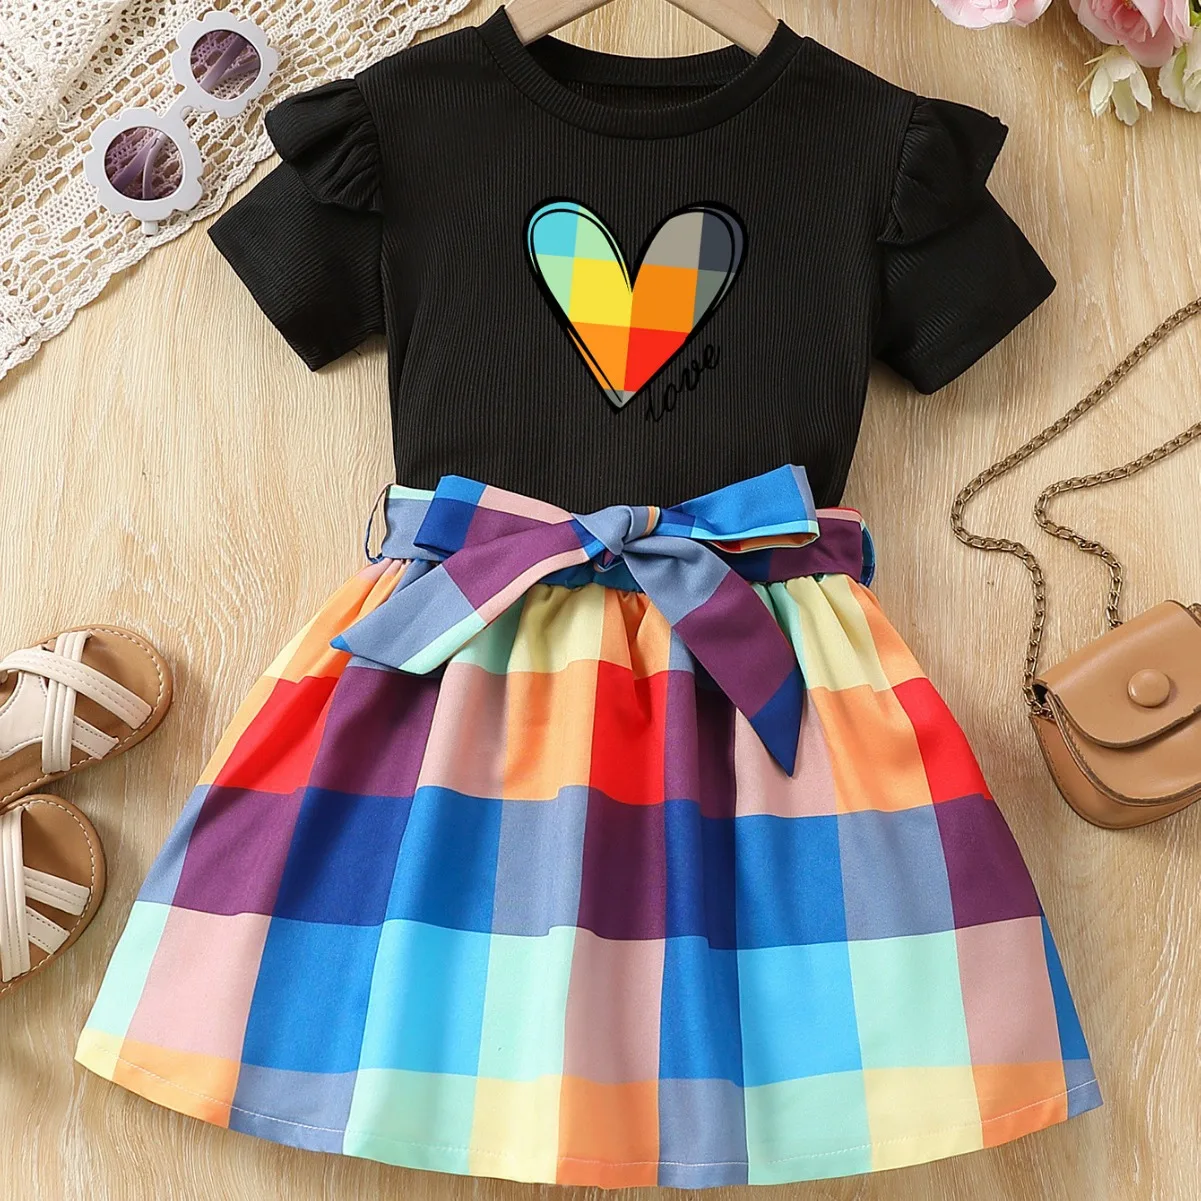 2024 Summer Kids Clothes Sets Girls Casual Cute Heart Print Short Sleeve T-shirt Top + Plaid Skirt Children's Two-piece Clothing new girls clothing sets summer girls clothes white pineapple t shirt pants 2pcs kids suit fashion 3 7 years girls clothes sets